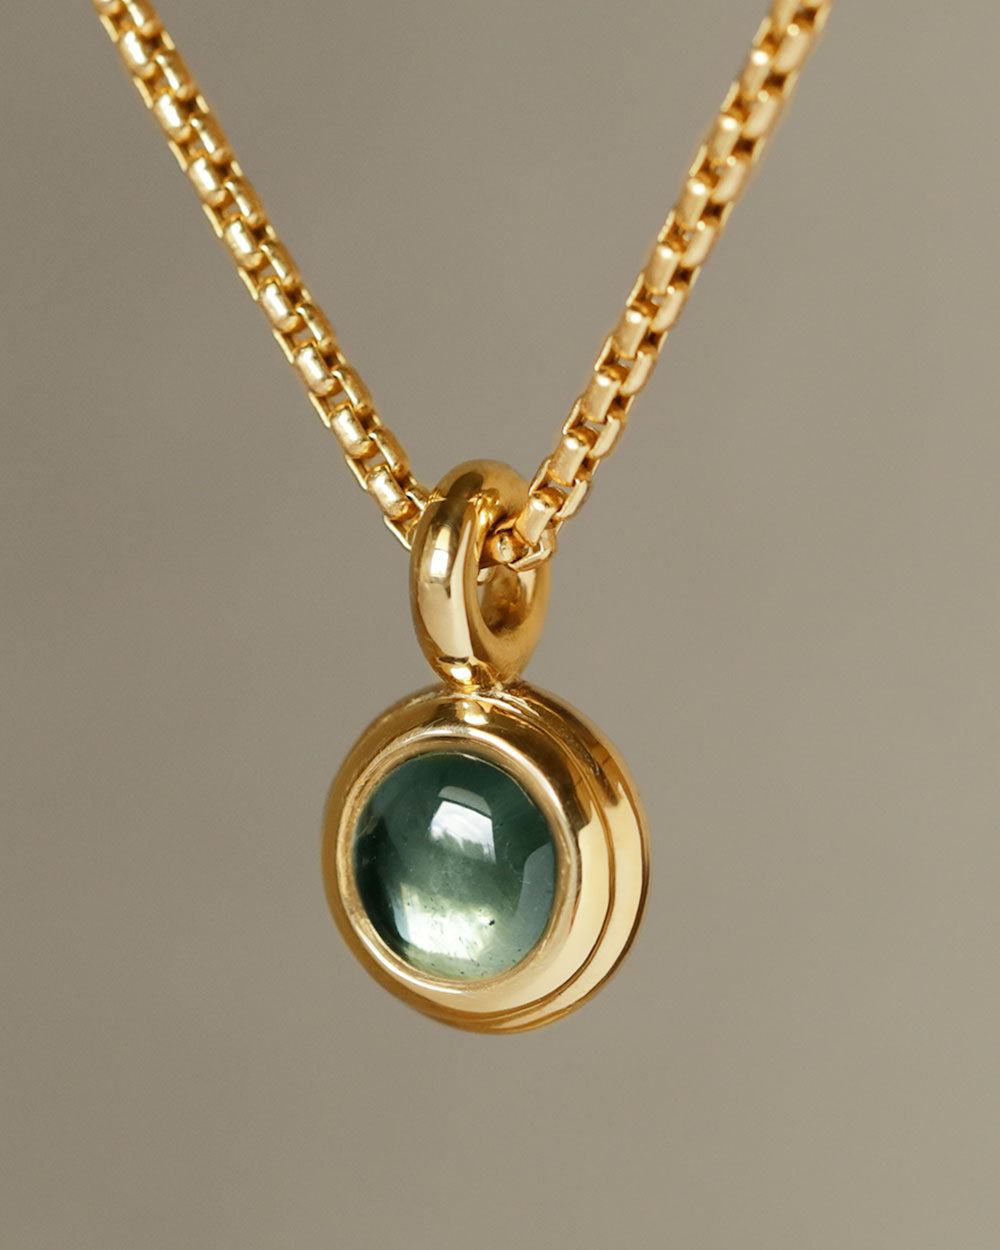 Duchess Pendant blue green tourmaline cabochon solid 18k yellow gold round pendant George Rings